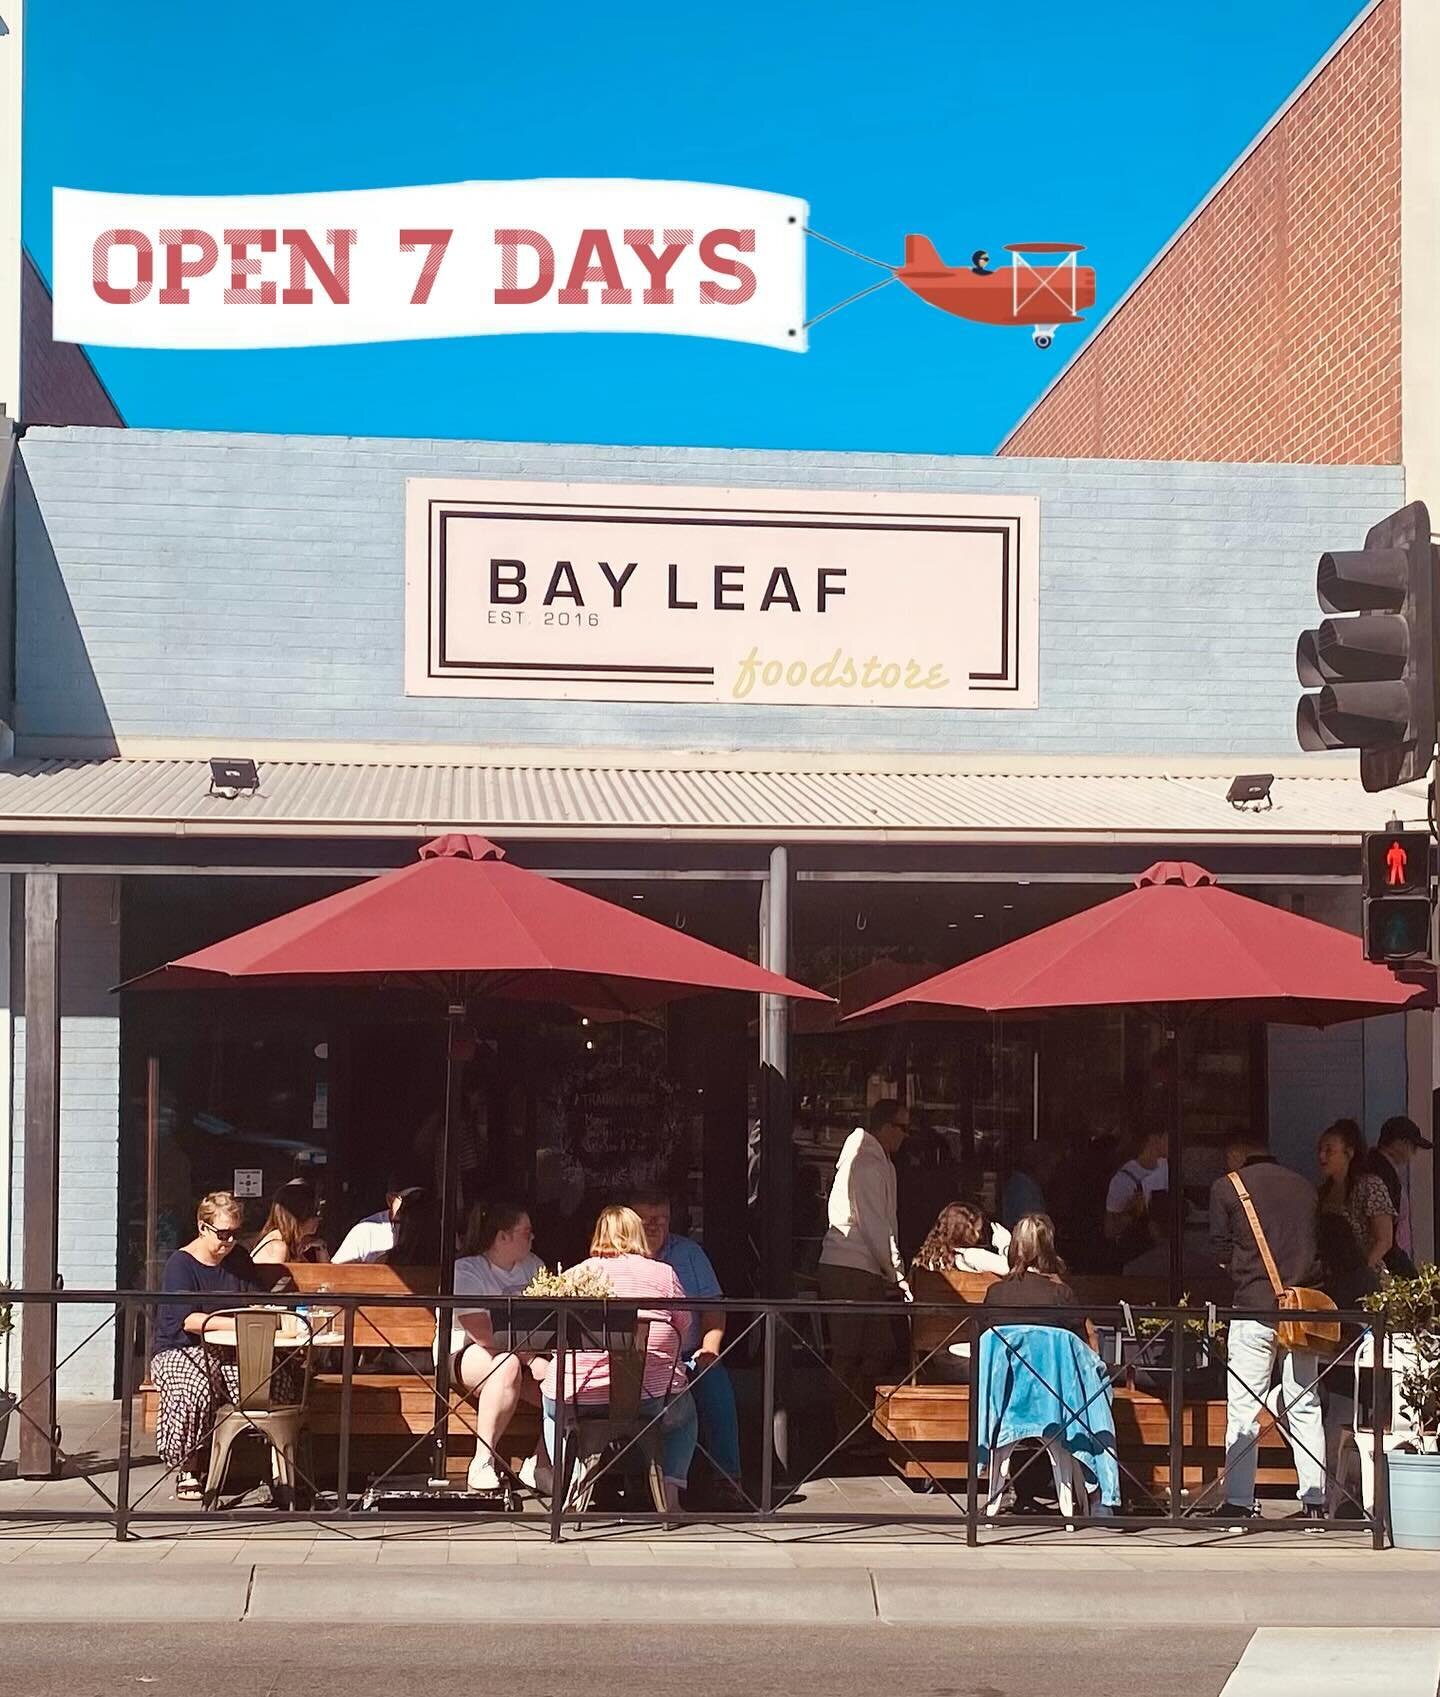 Exciting news!🙌 Yes, BayLeaf is now open 7 DAYS from Monday the 5th of February.  Trading hours Monday-Friday 7.30-3, Saturday/Sunday 8-2